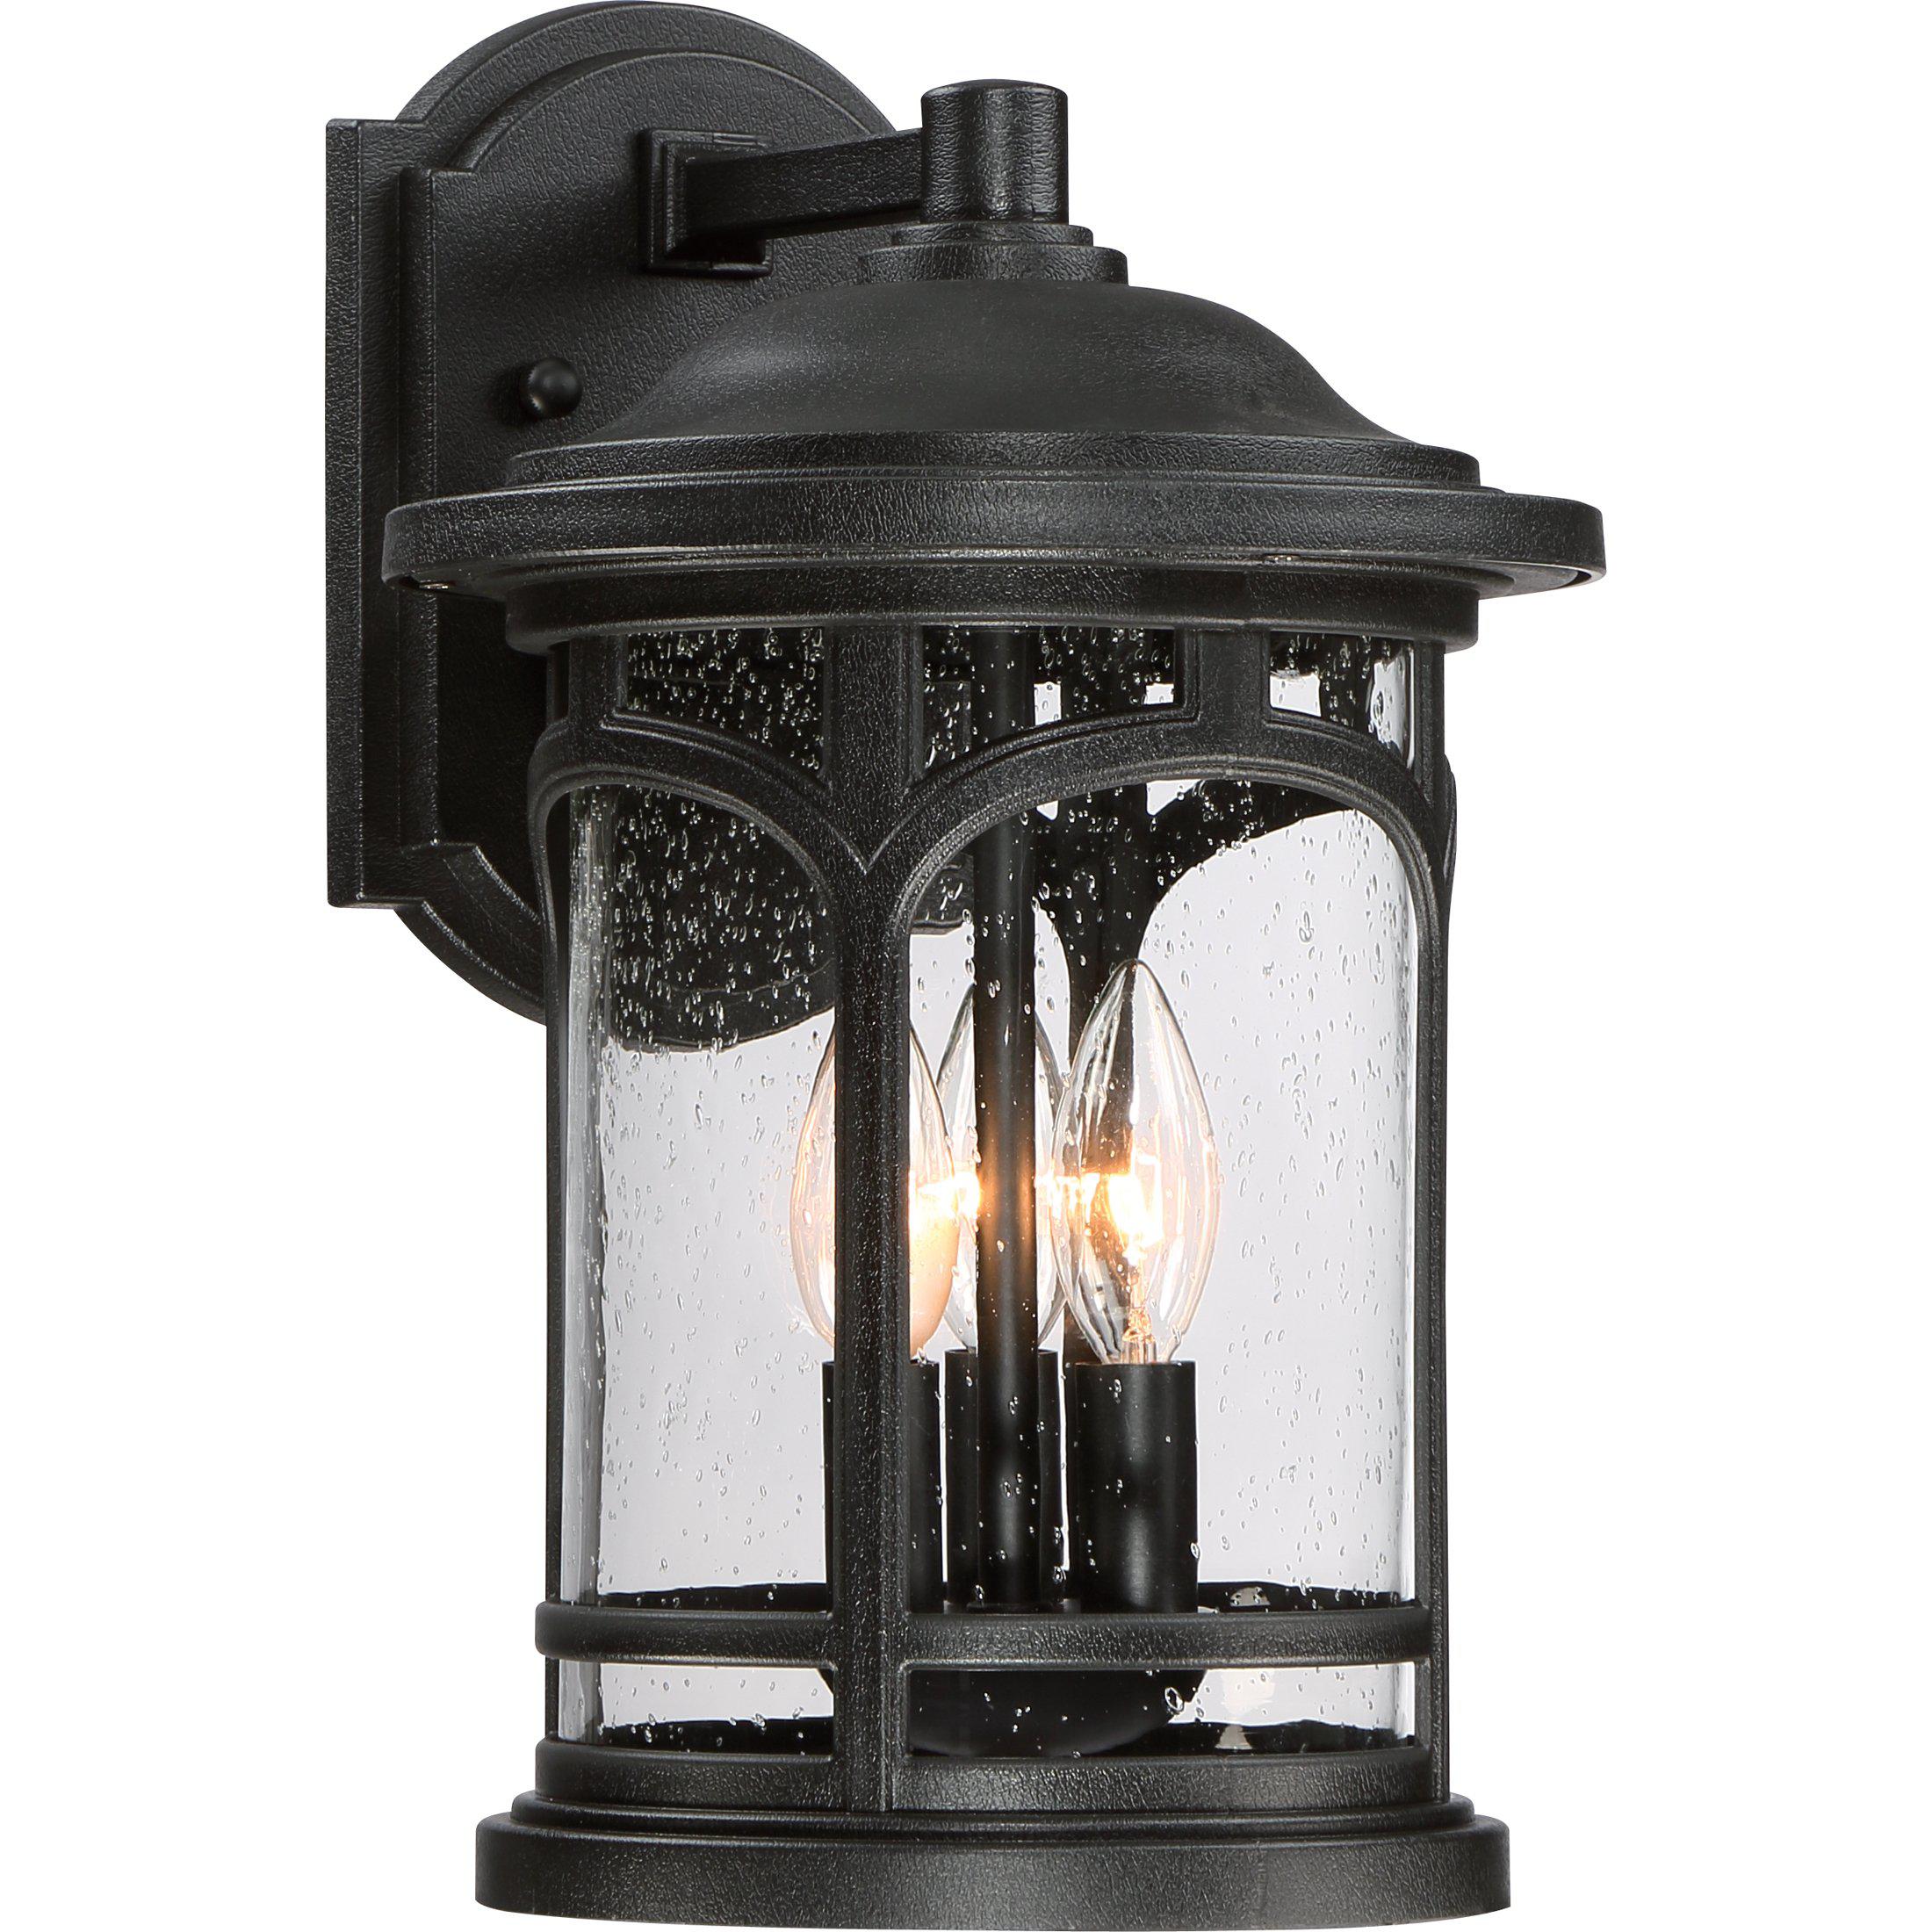 Quoizel  Marblehead Outdoor Lantern, Small 3 Light Outdoor l Wall Quoizel Mystic Black  